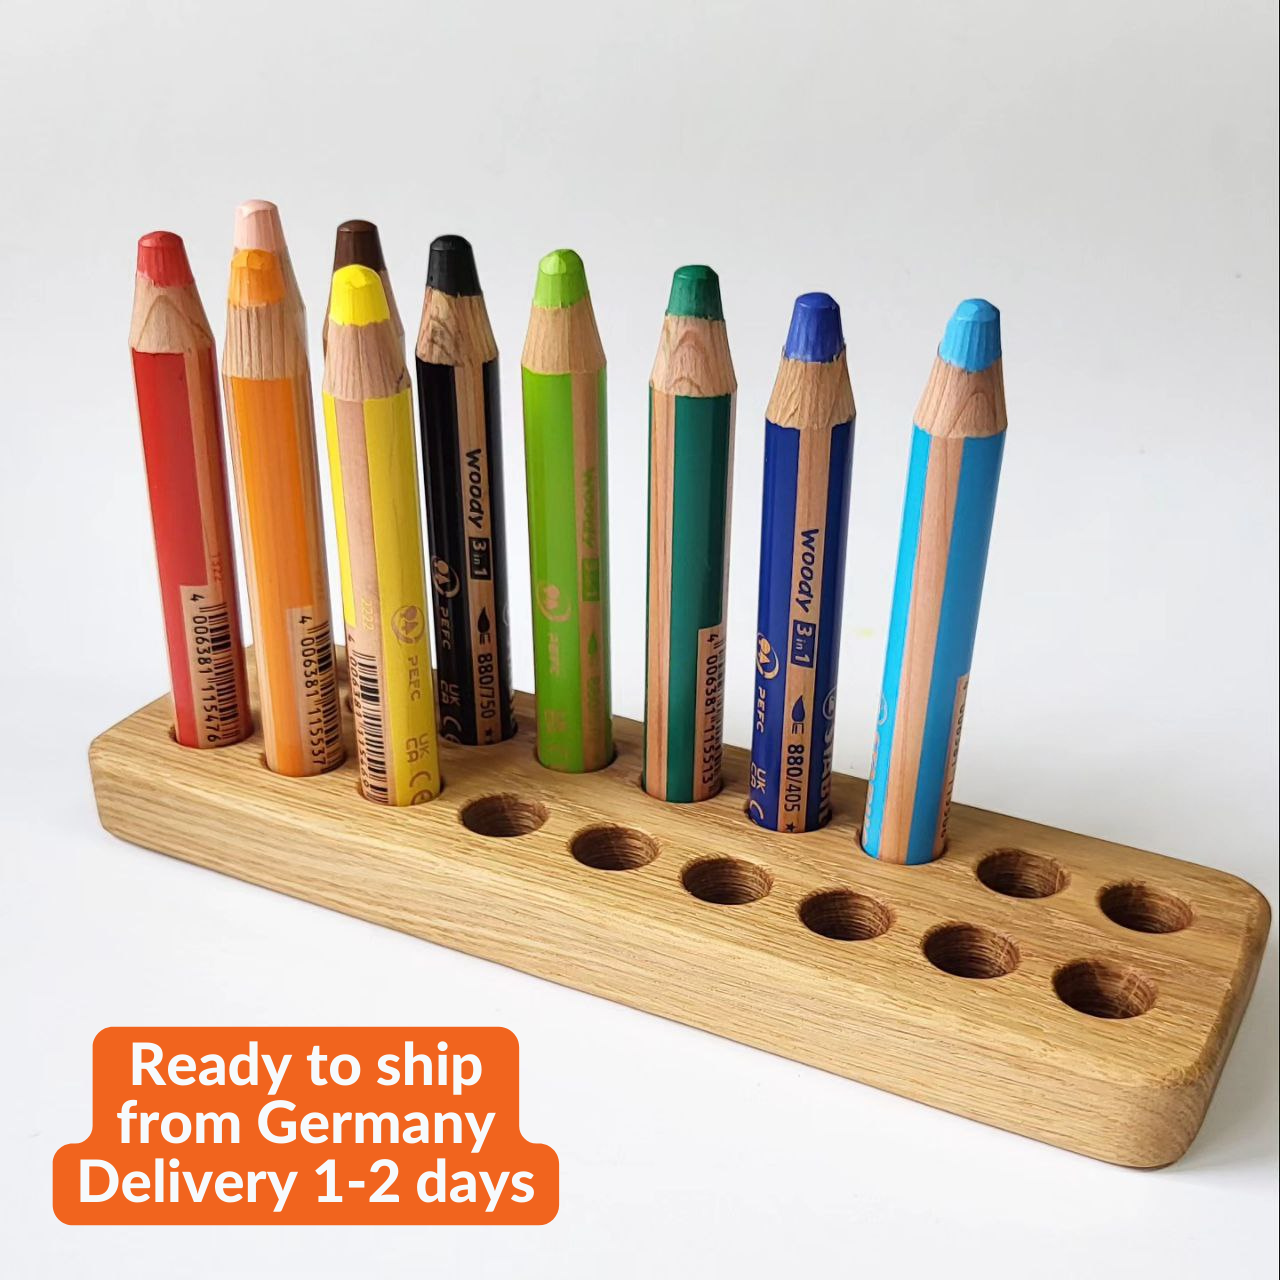 Stabilo pencil holder for 18 woody pencils 3 in 1, without pencils